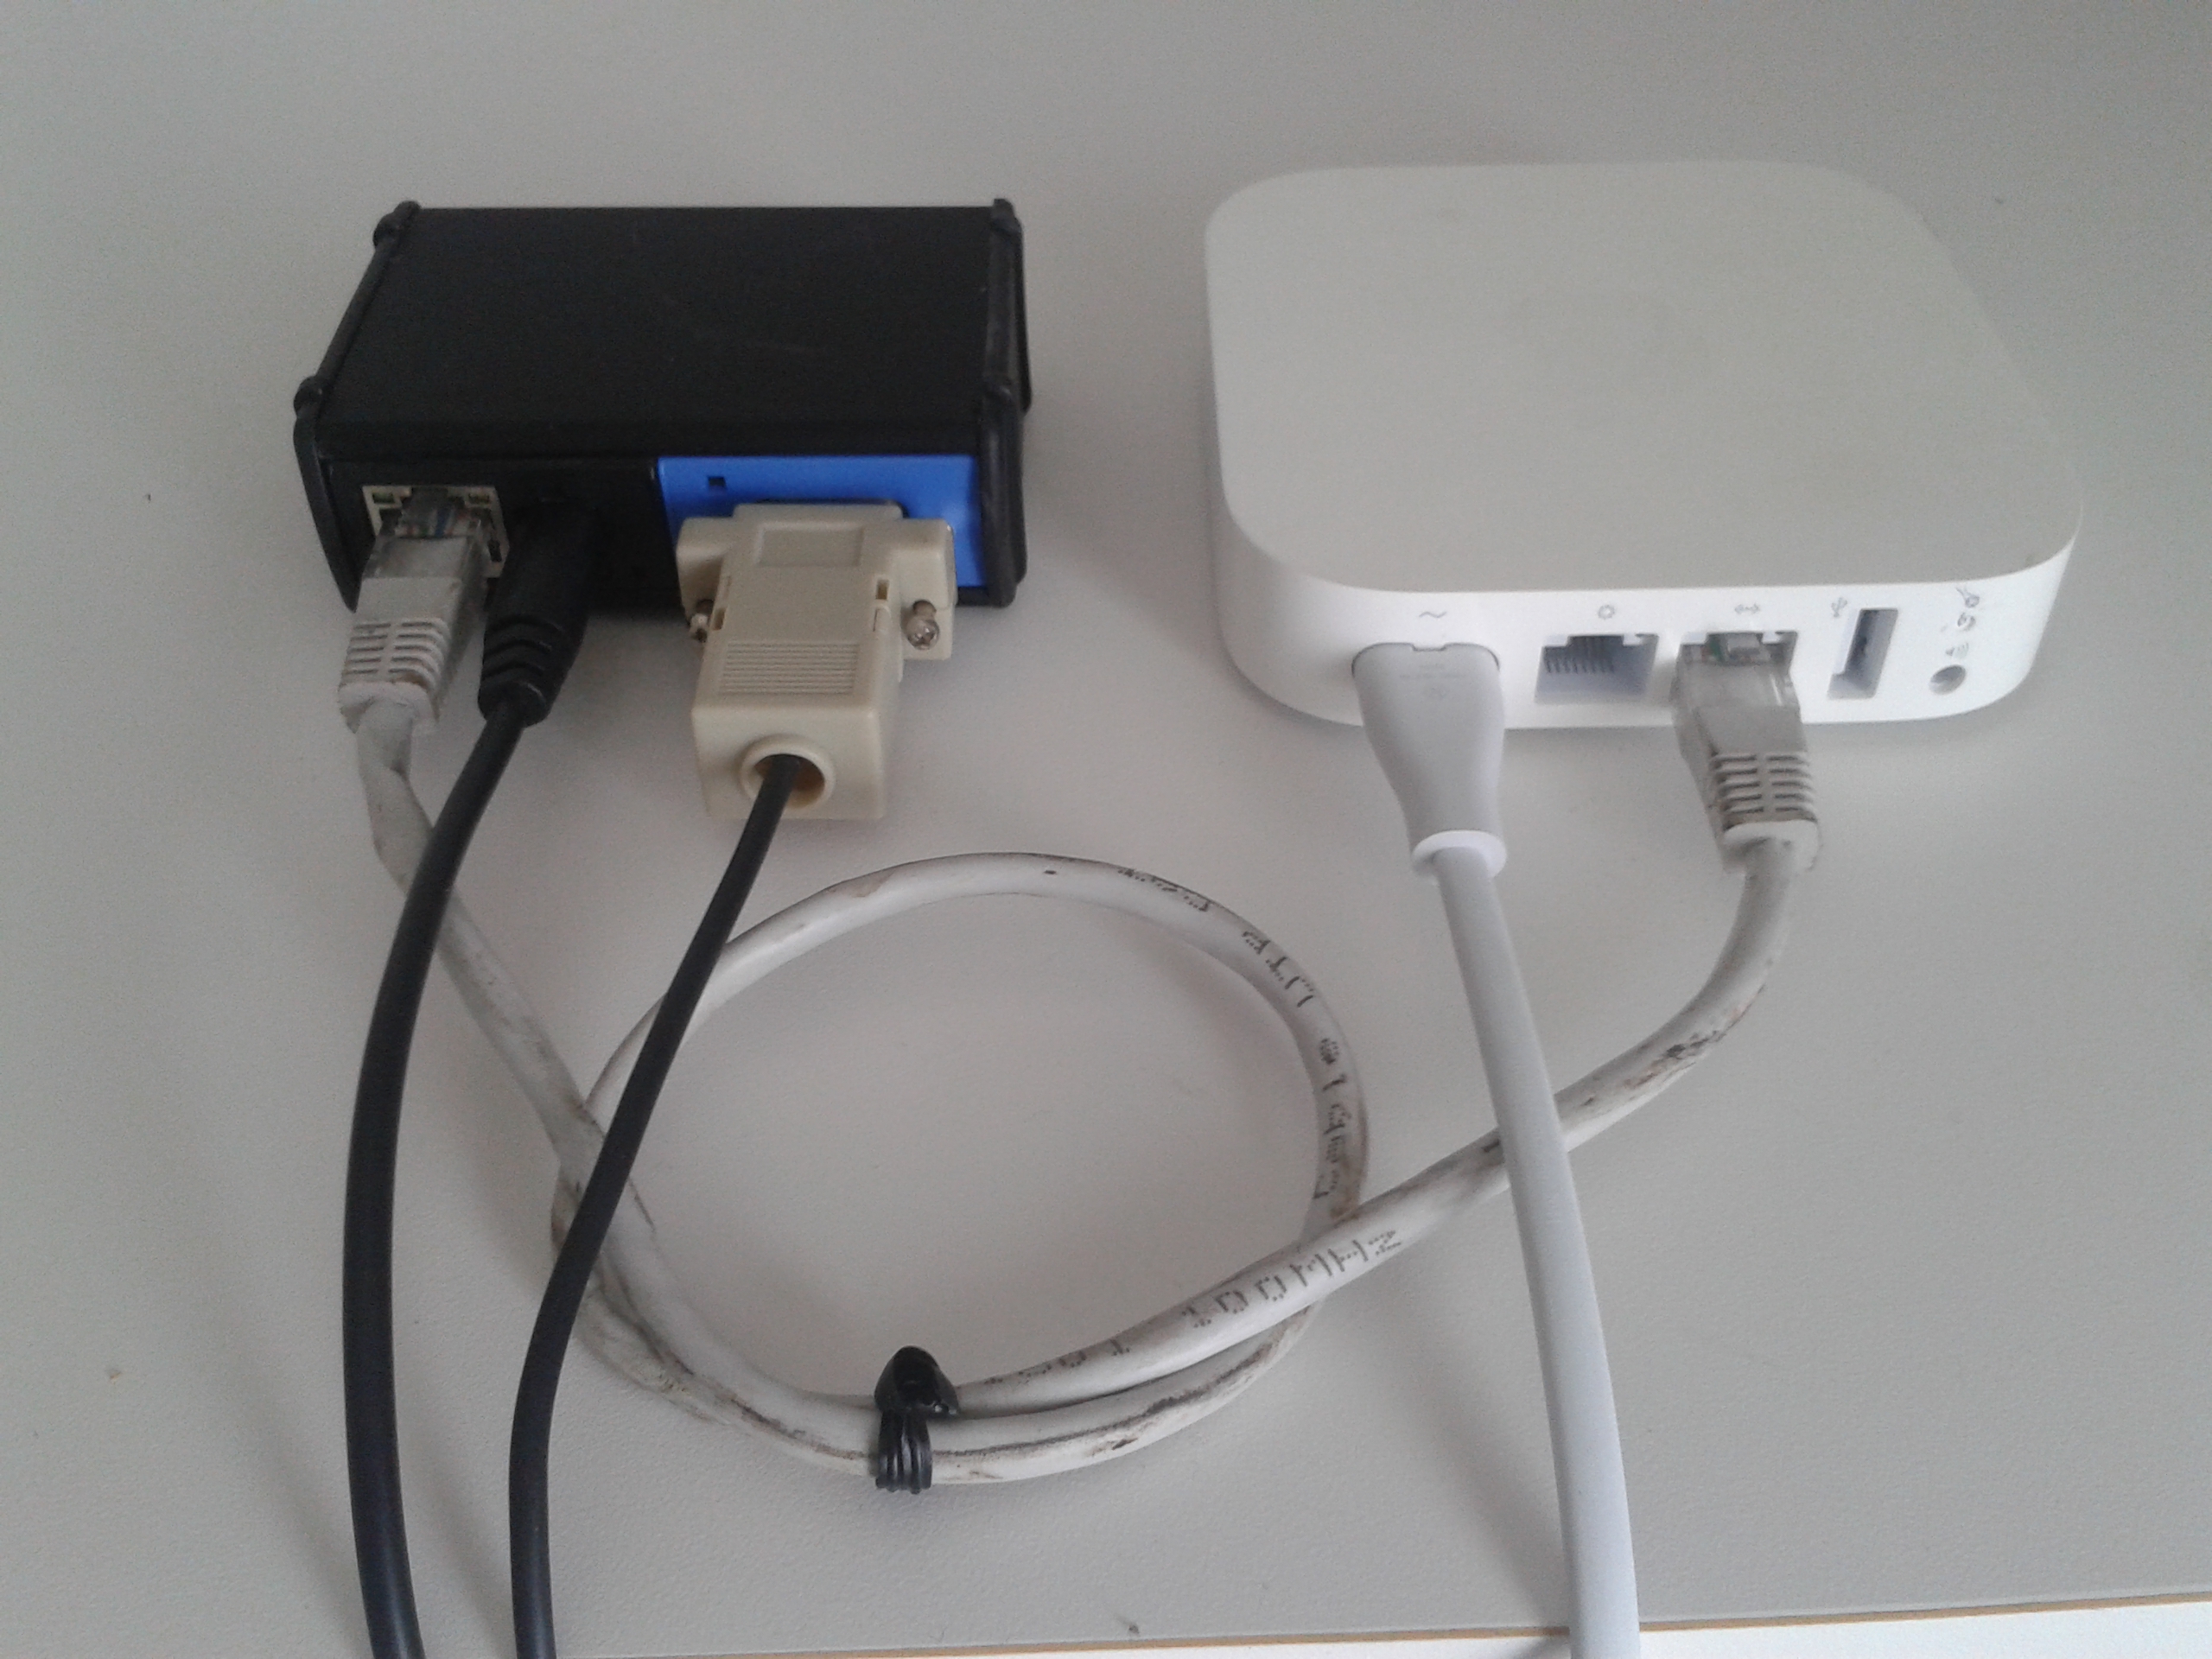 apple airport express router setup